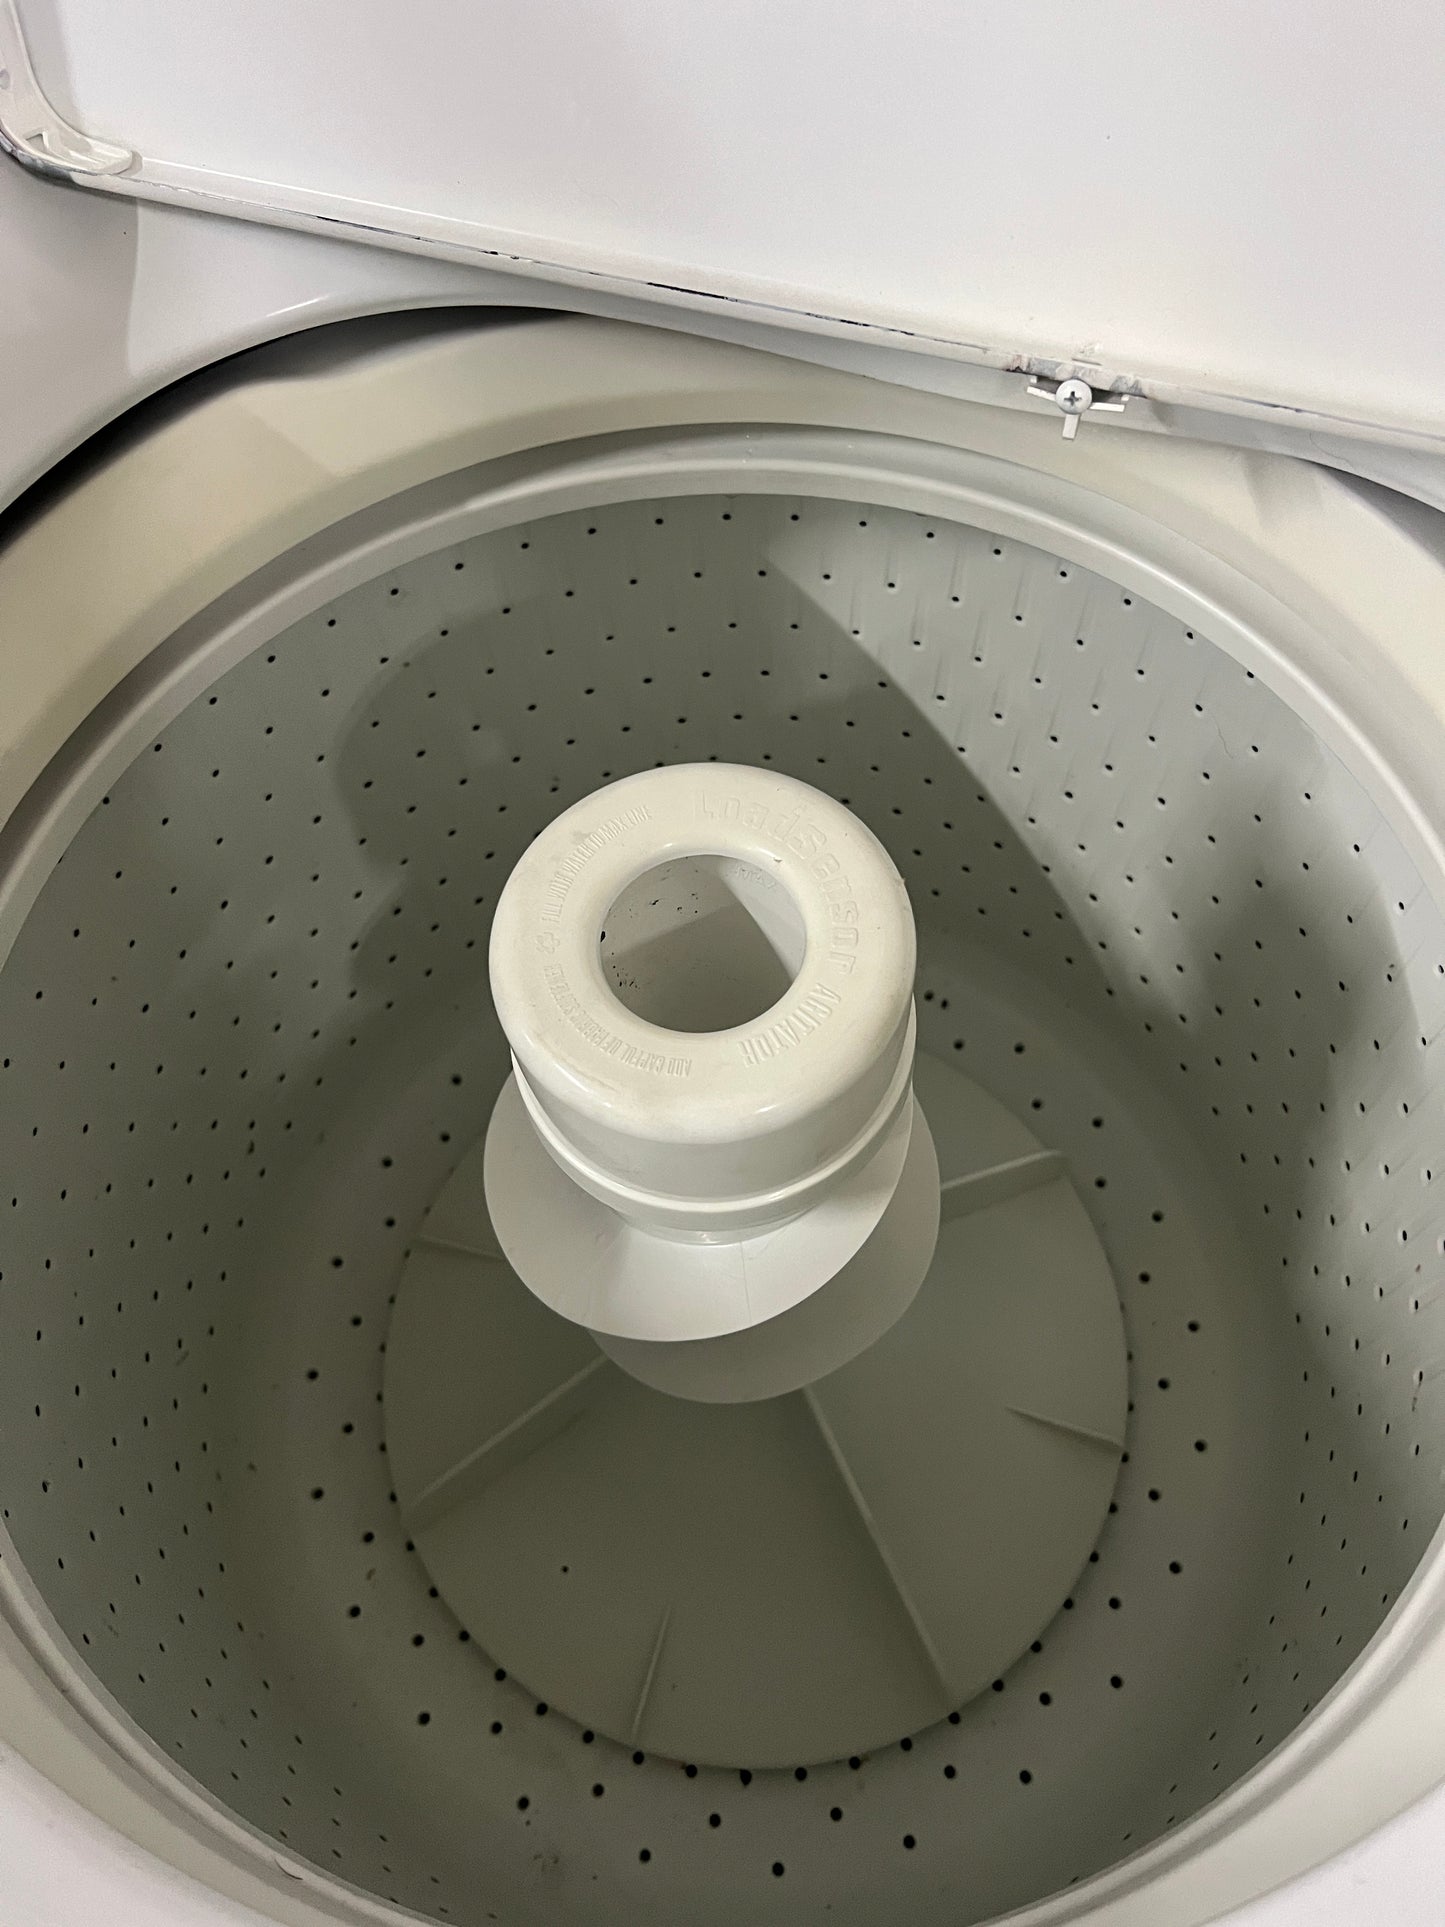 Maytag Top Load Washer in White, MAV5000AWW, 999413